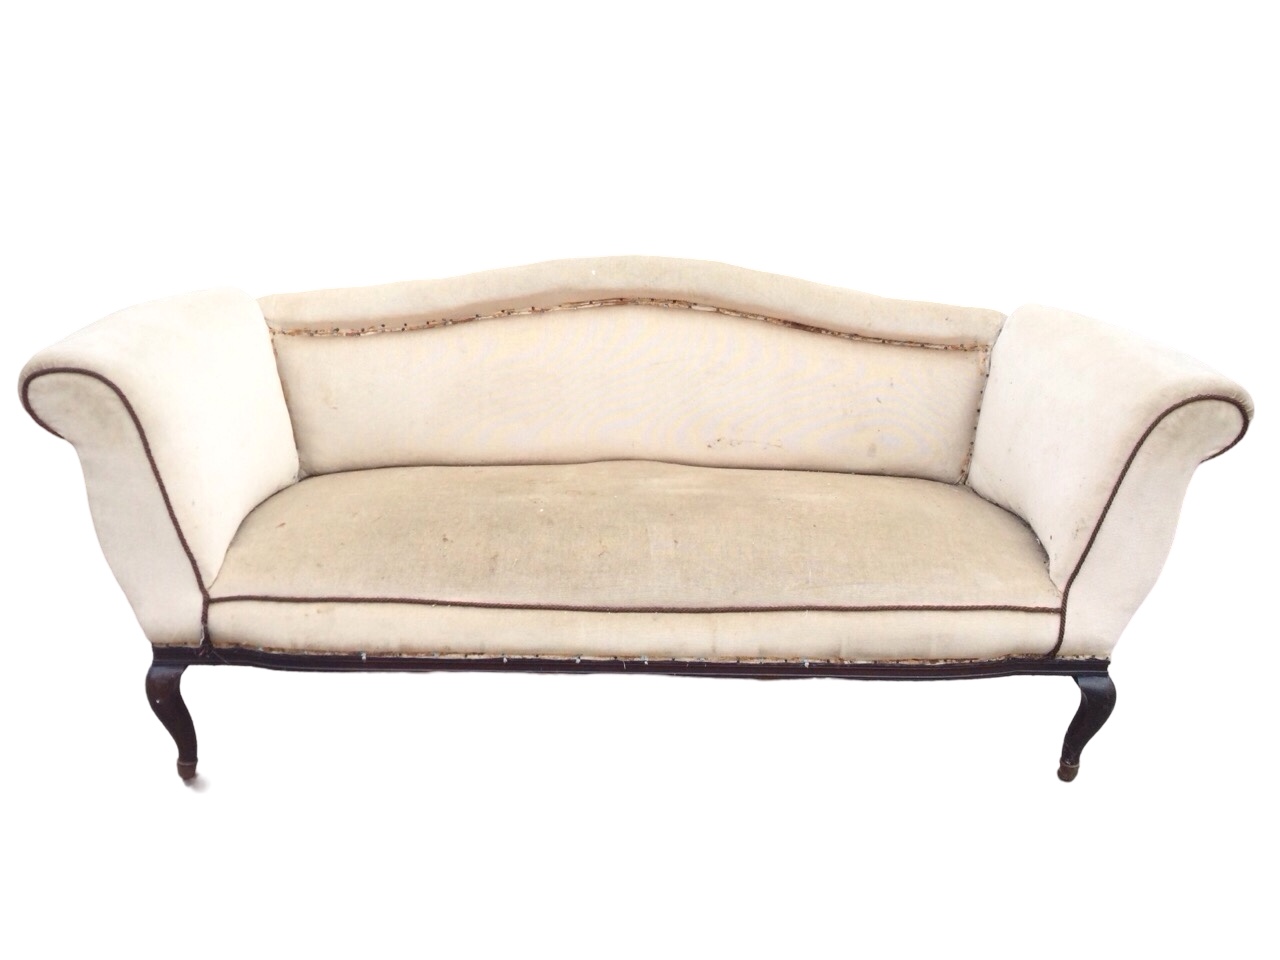 An Edwardian upholstered sofa with arched rolled back and rectangular sprung seat flanked by